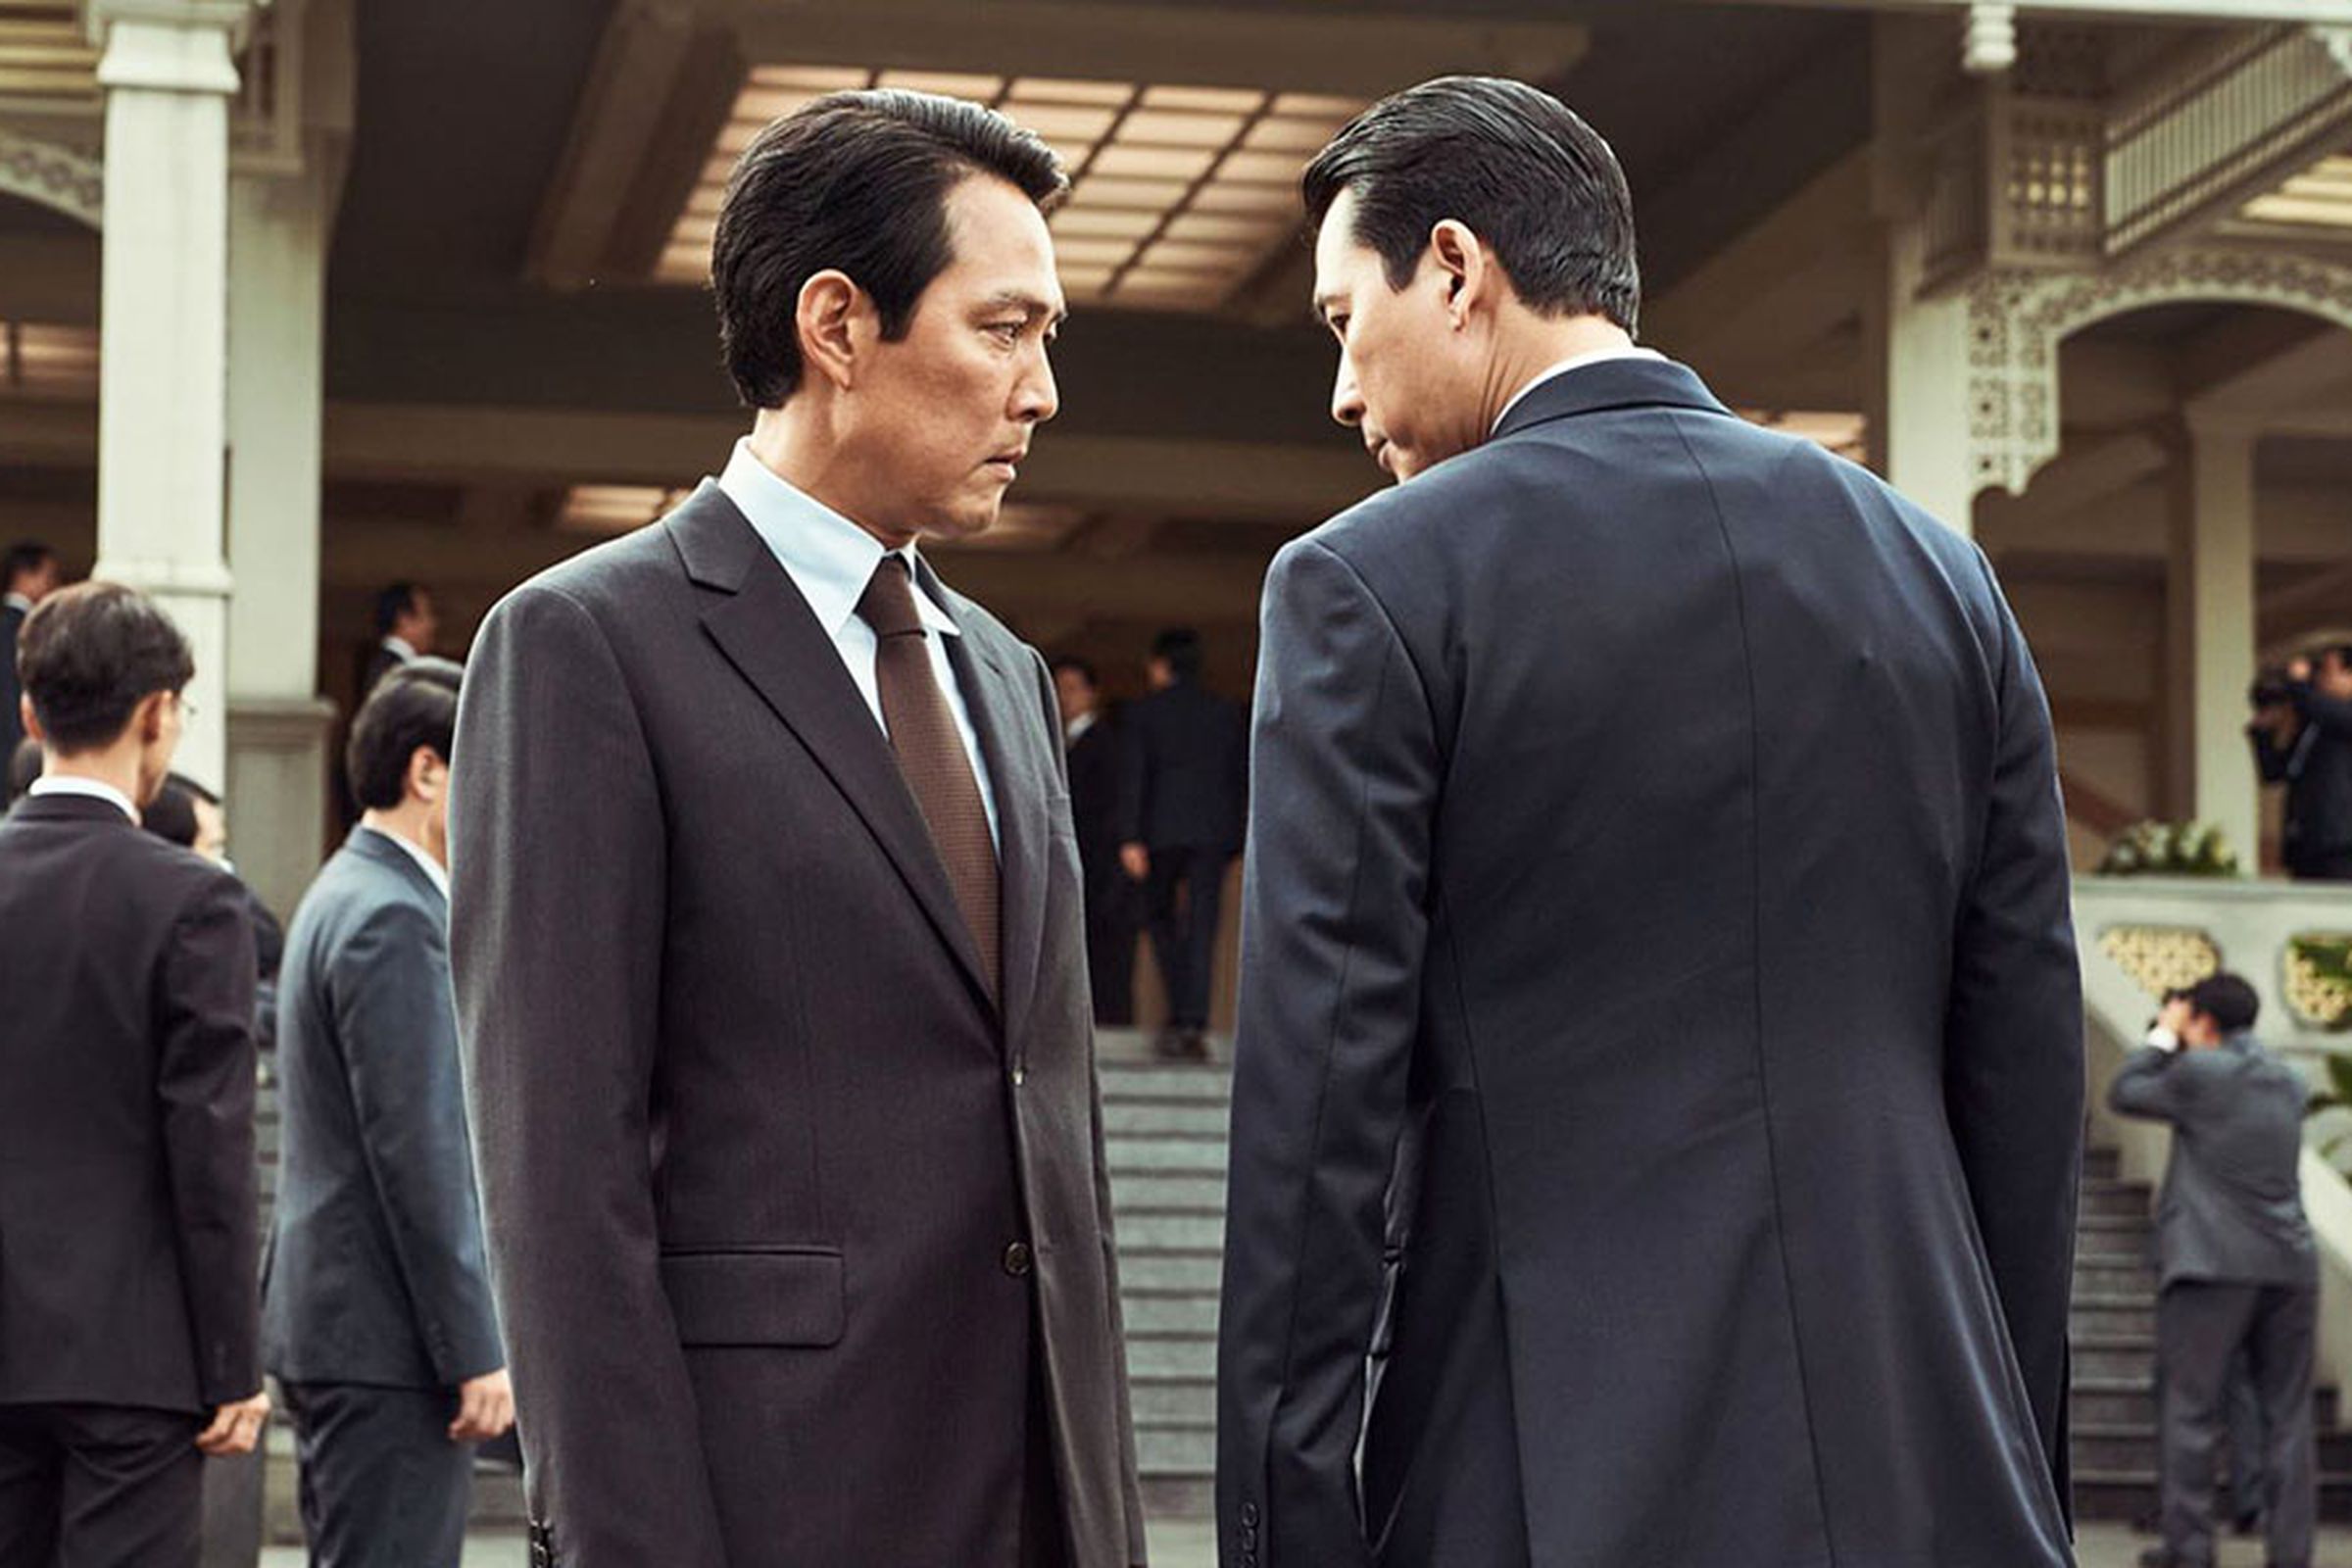 Lee Jung-jae and Jung Woo-sung in Hunt.